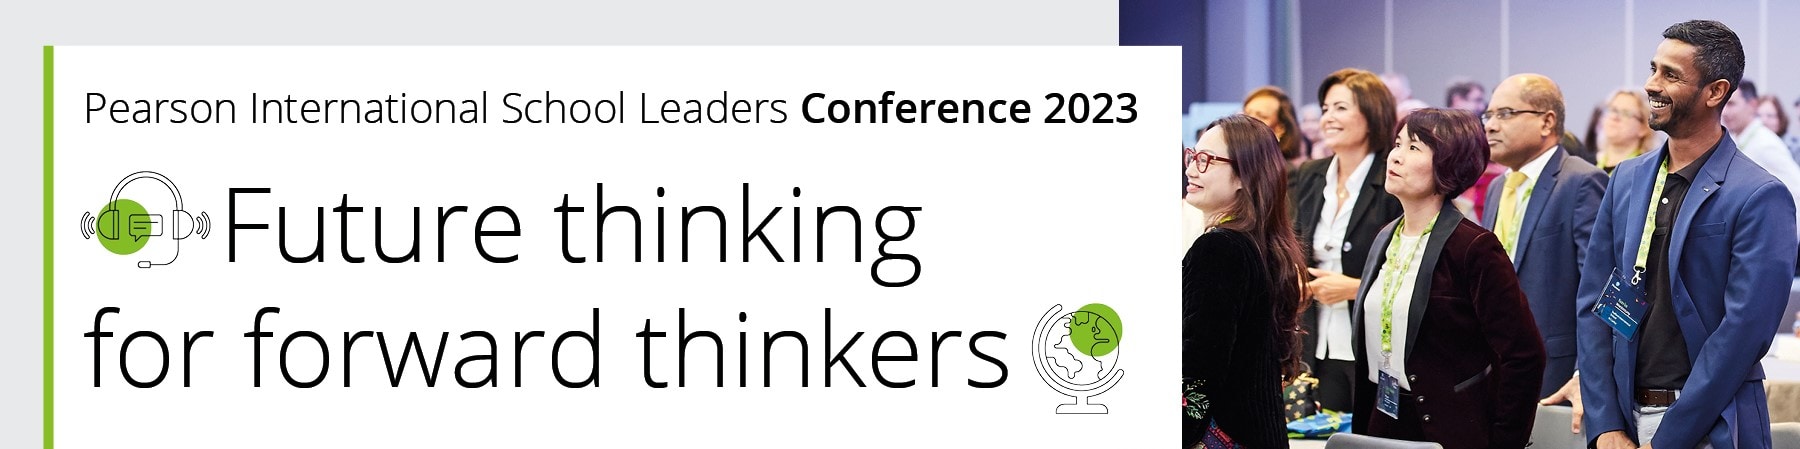 Future thinking for forward thinkers banner